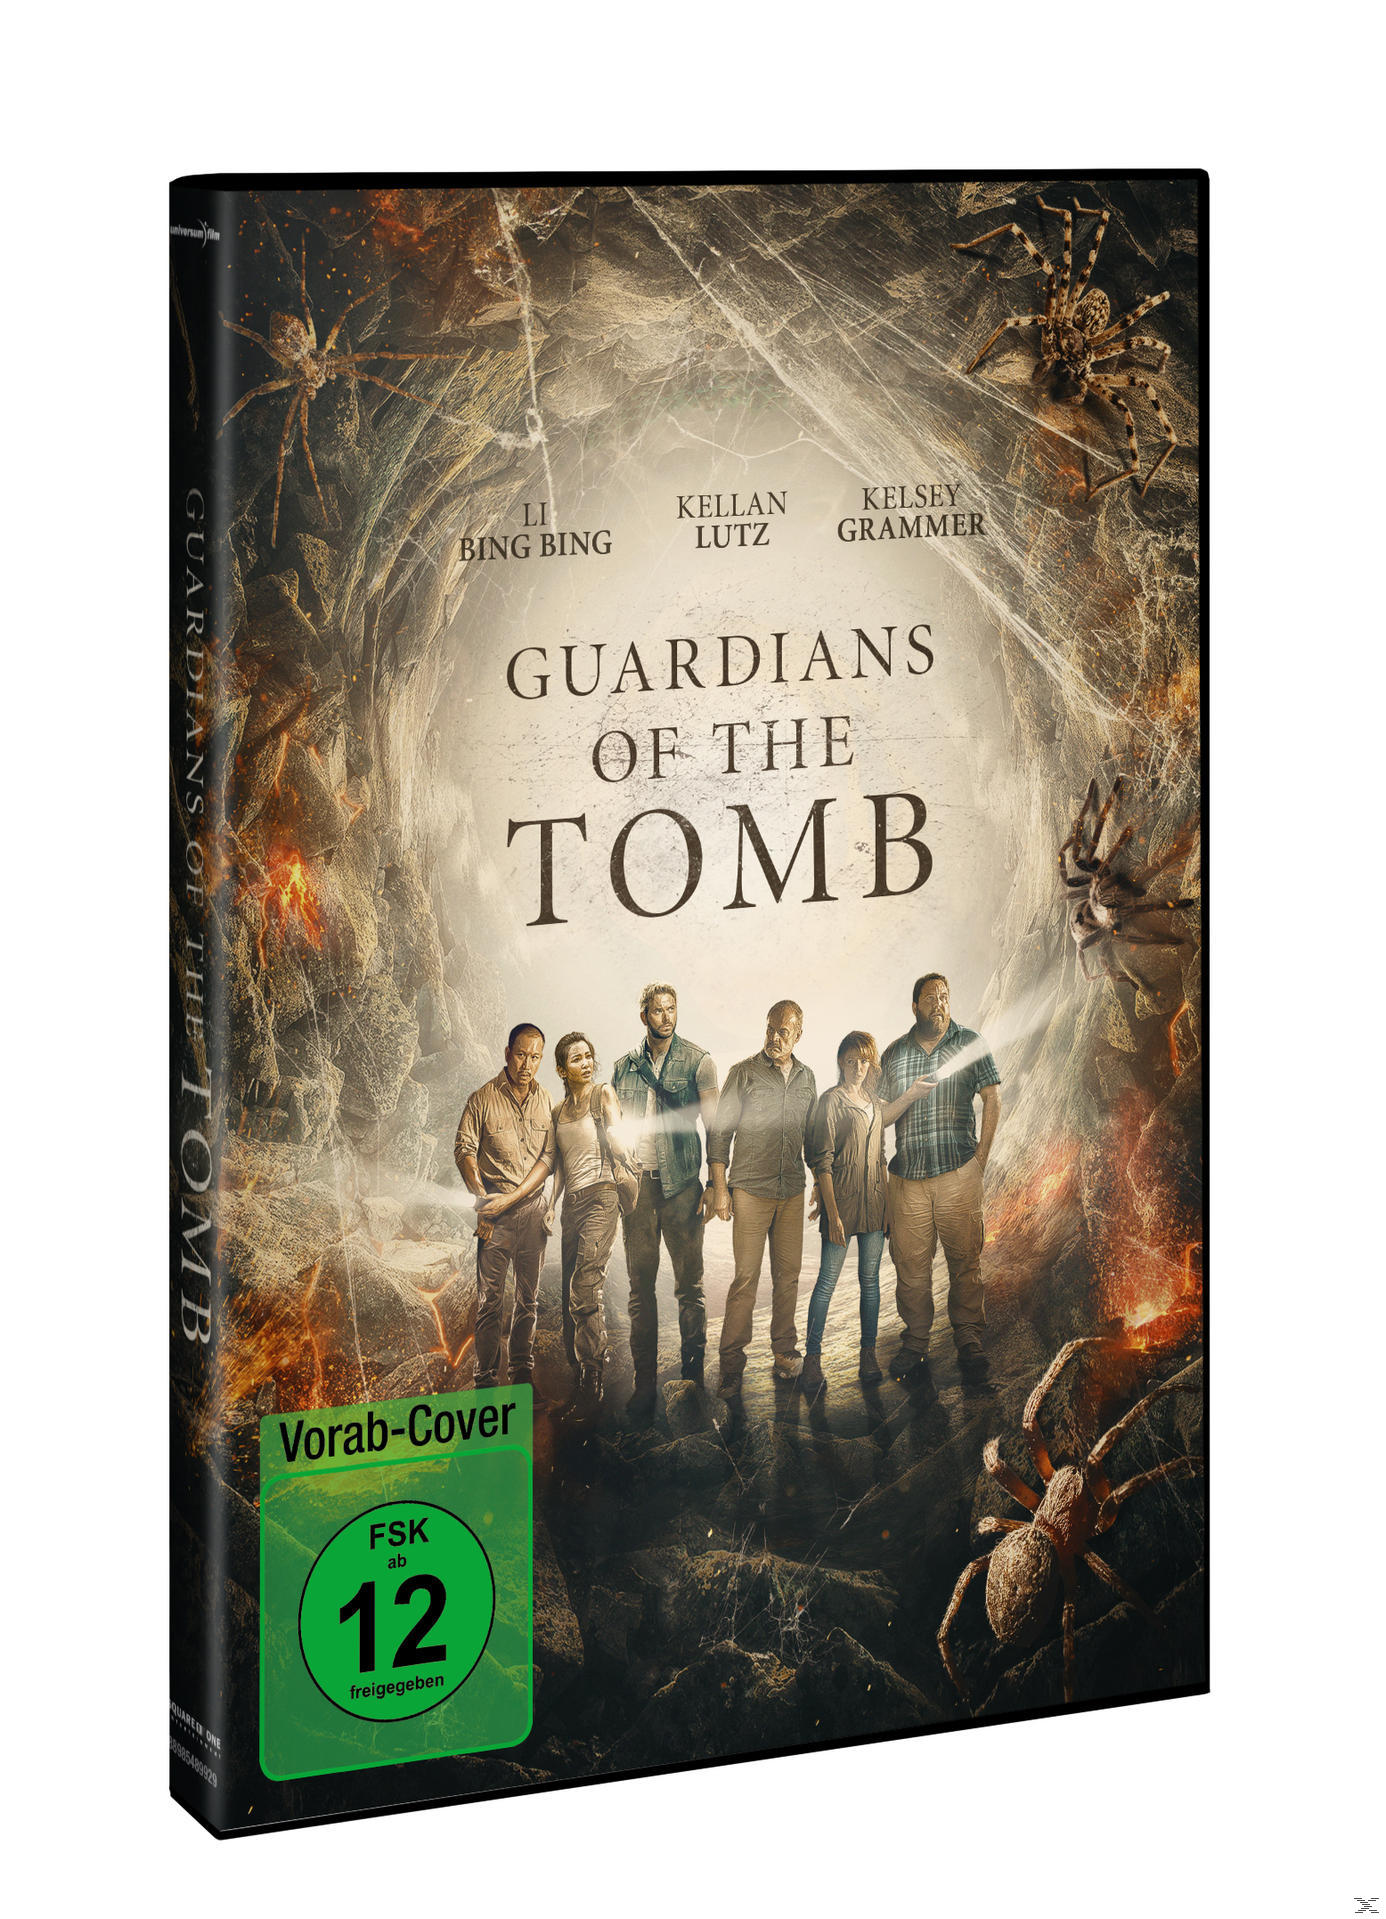 7 Guardians Tomb the DVD of